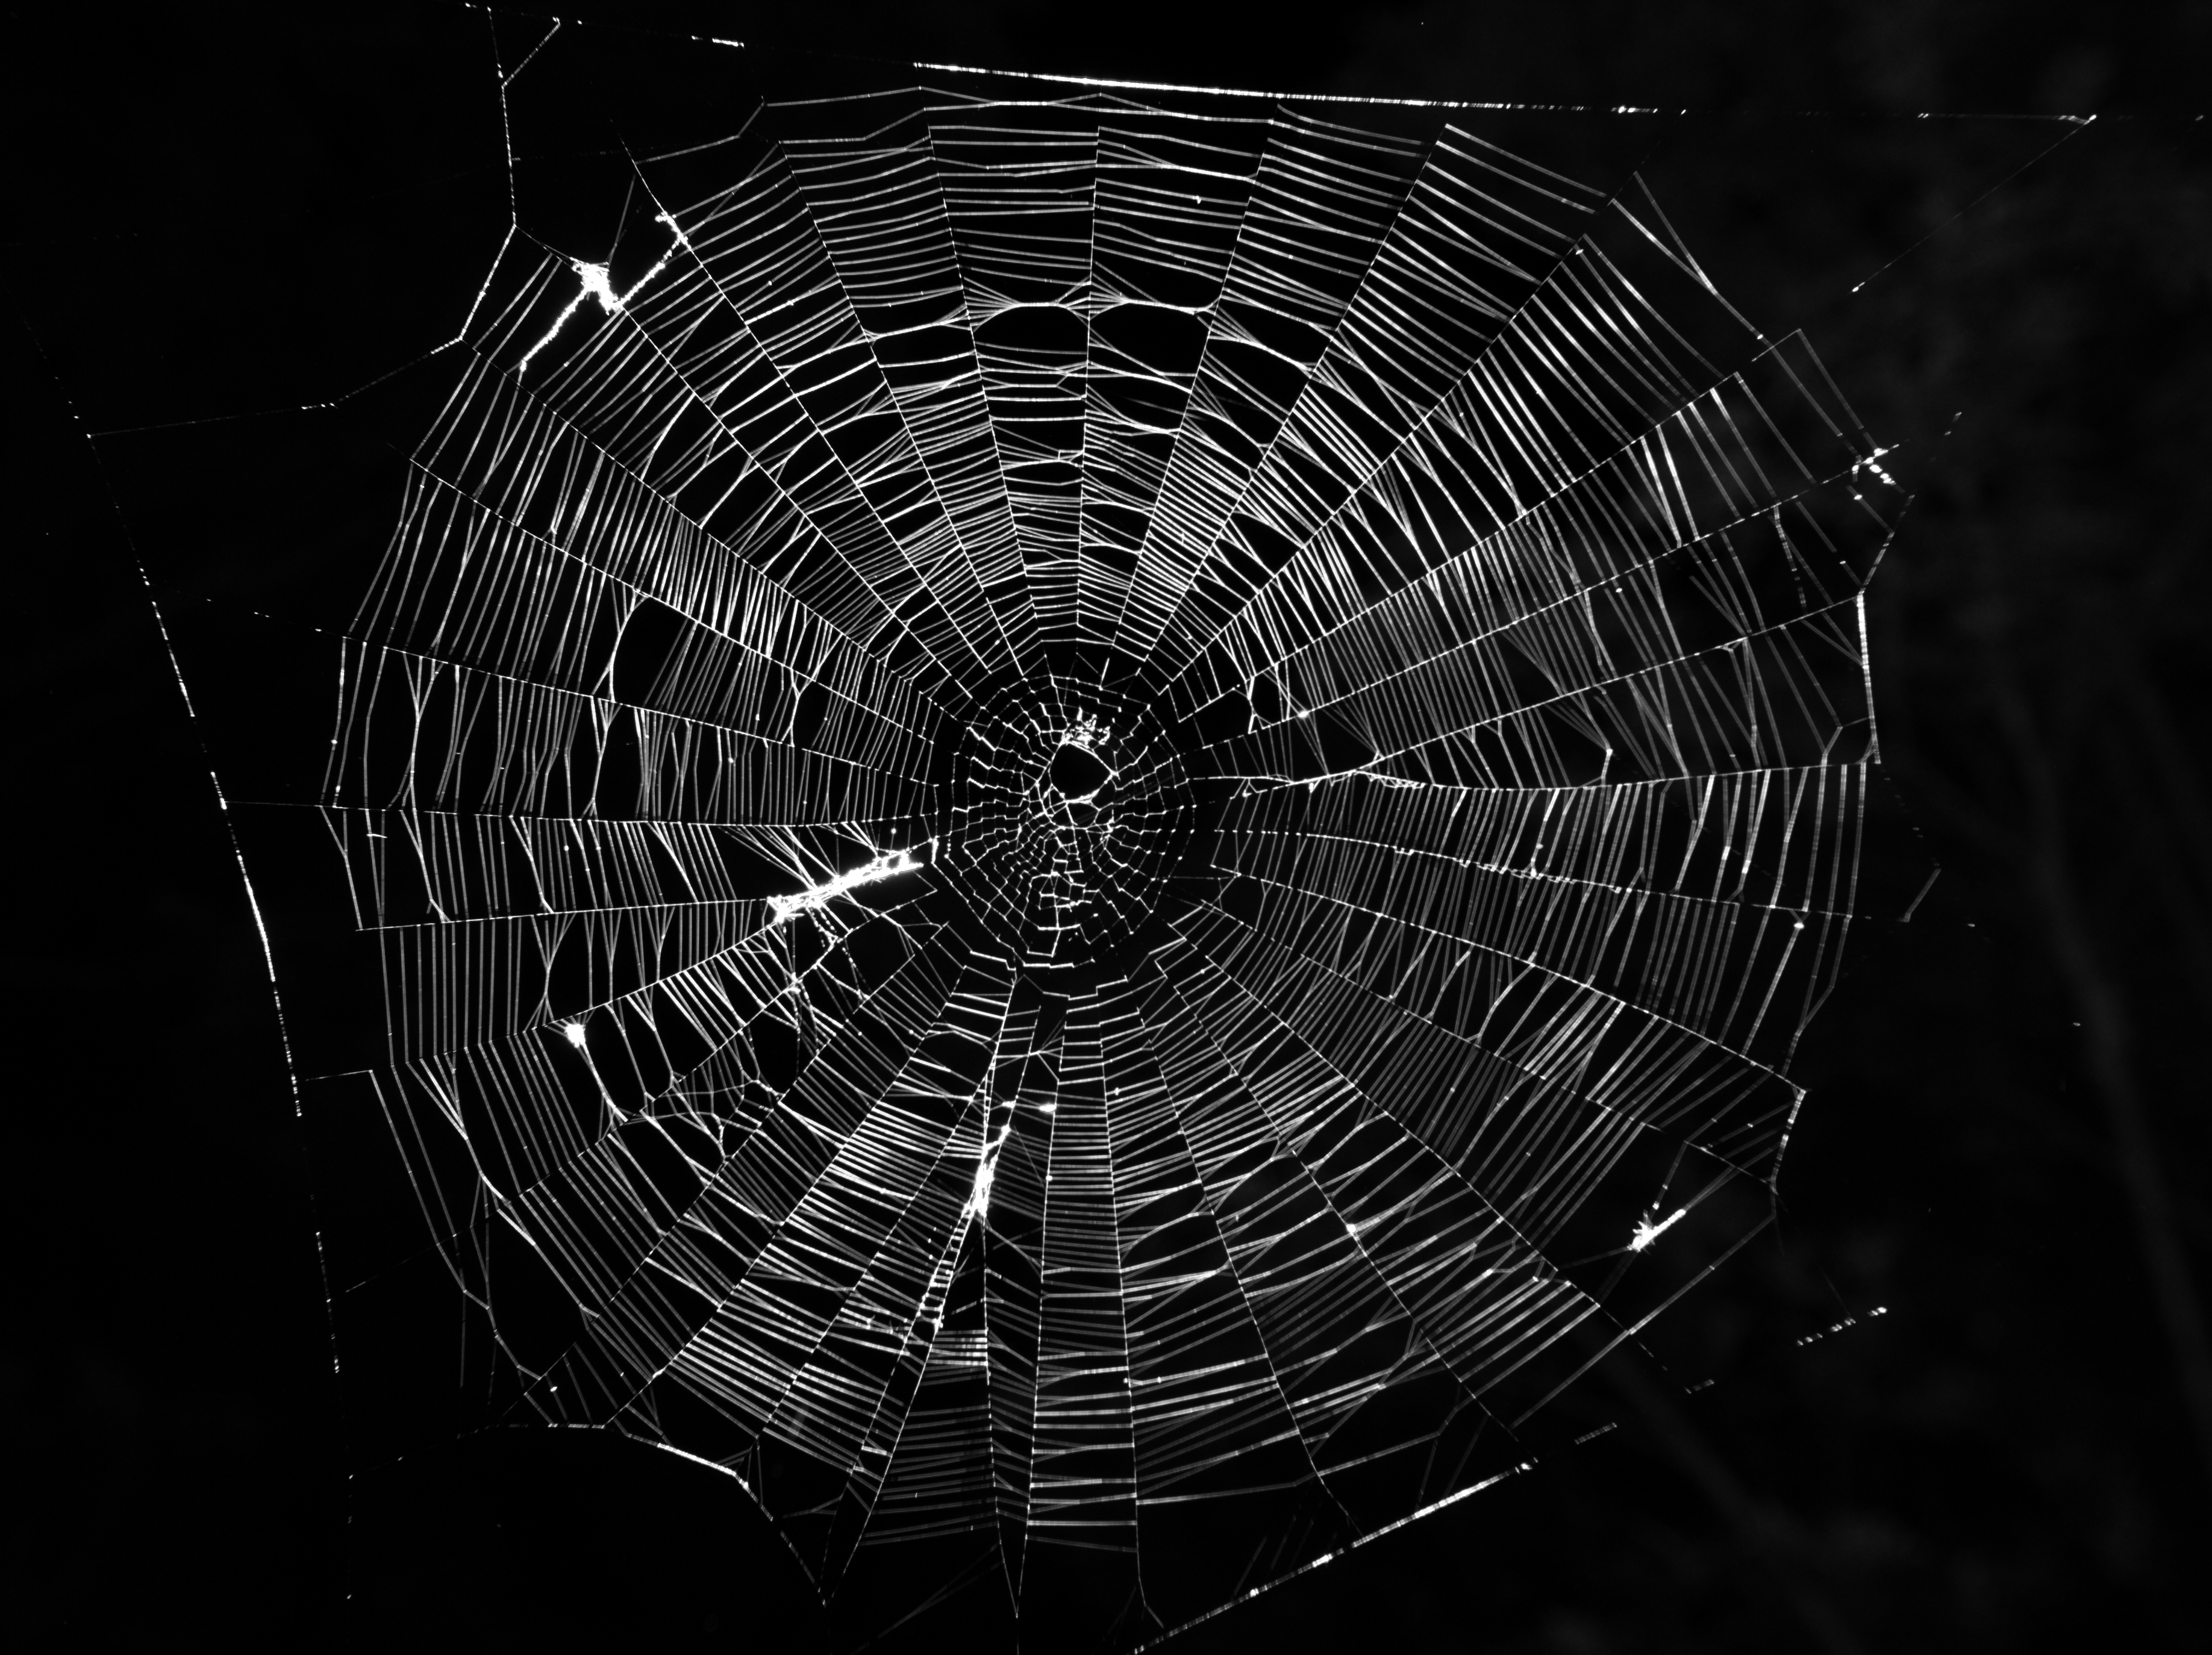 Typical-orb-web-photo